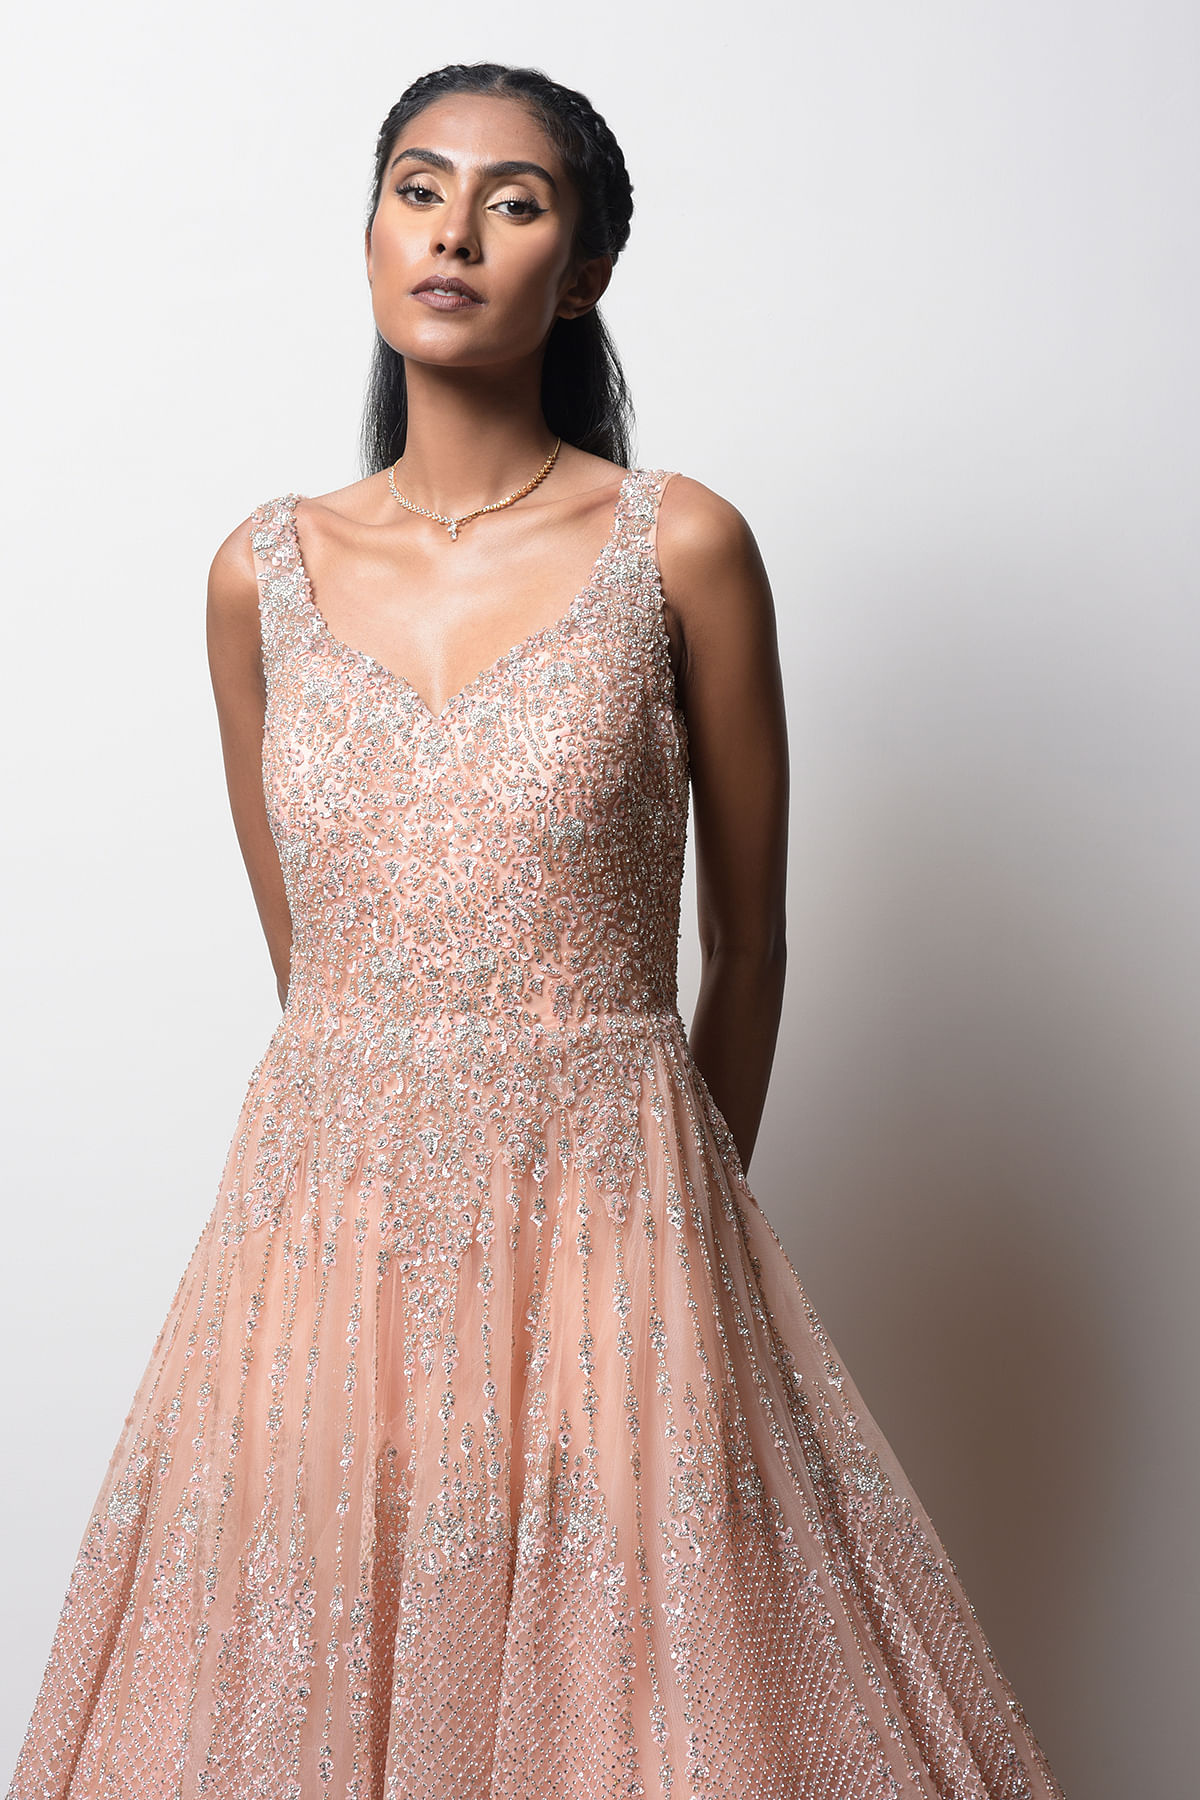 Trending Short Lace Gown Styles for Weddings and Party - 9JAINFORMED.COM |  Lace gown styles, African fashion dresses, Short african dresses